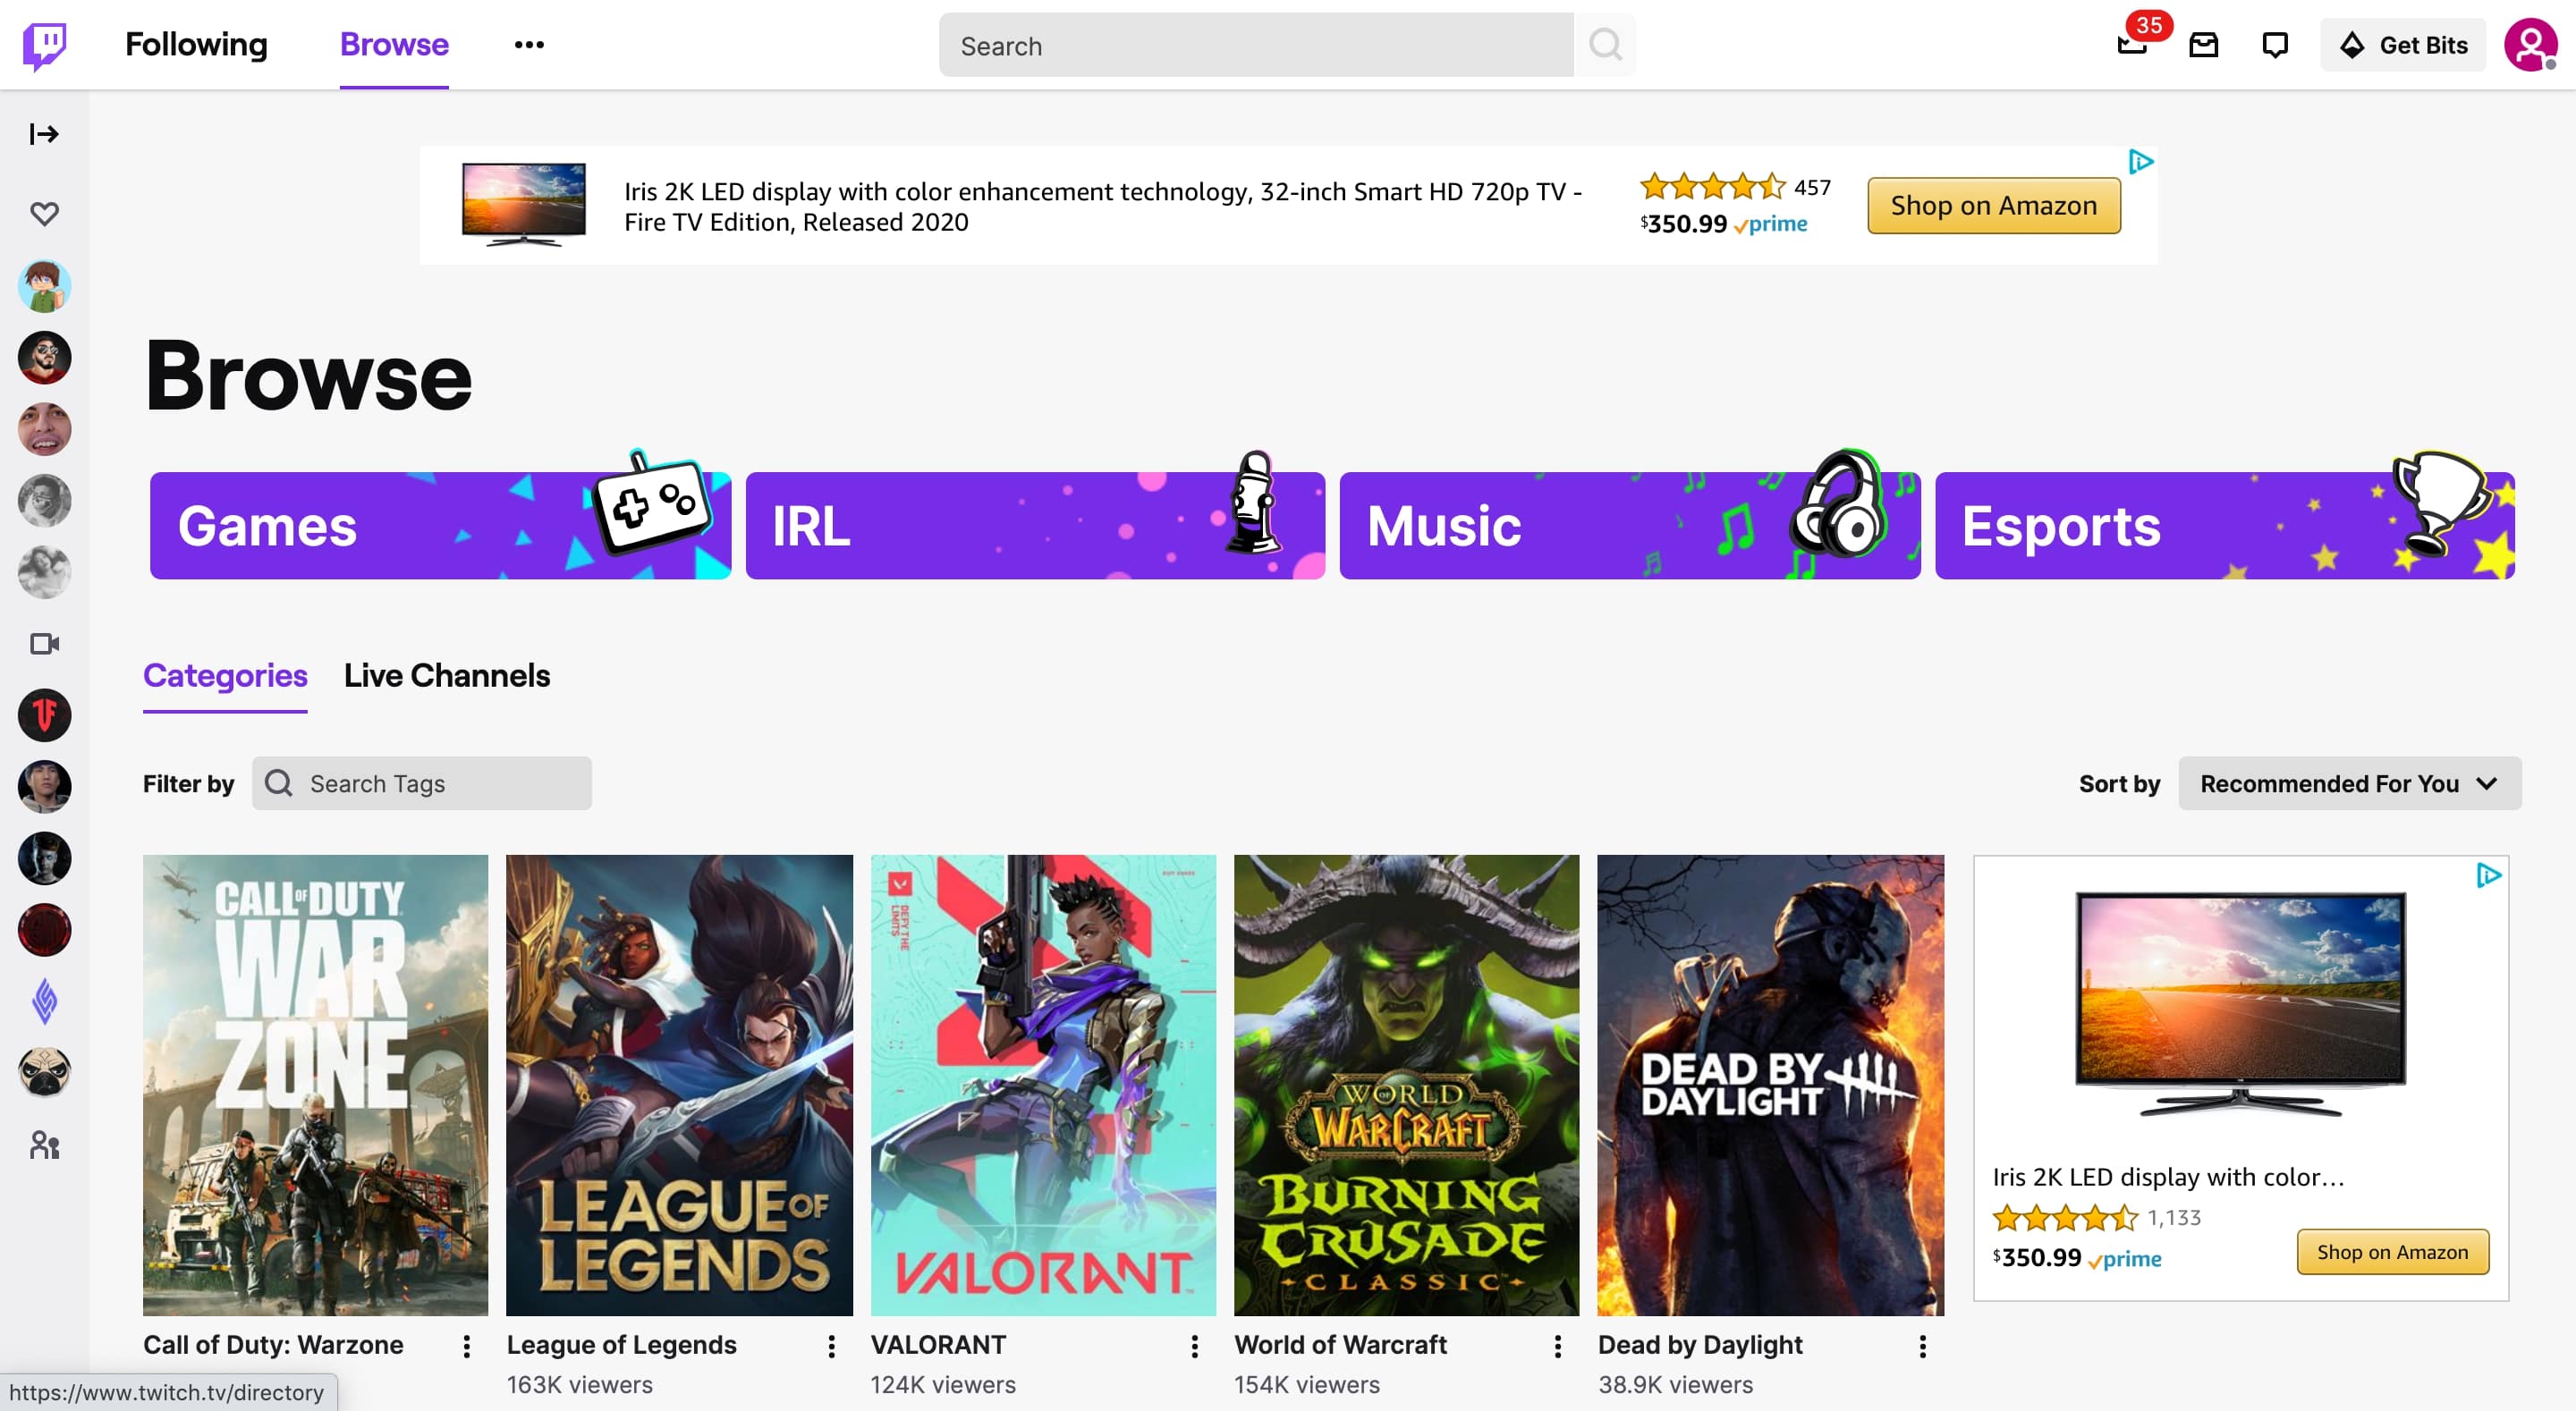 Advertising on Twitch is now easy from Amazon Advertising Console